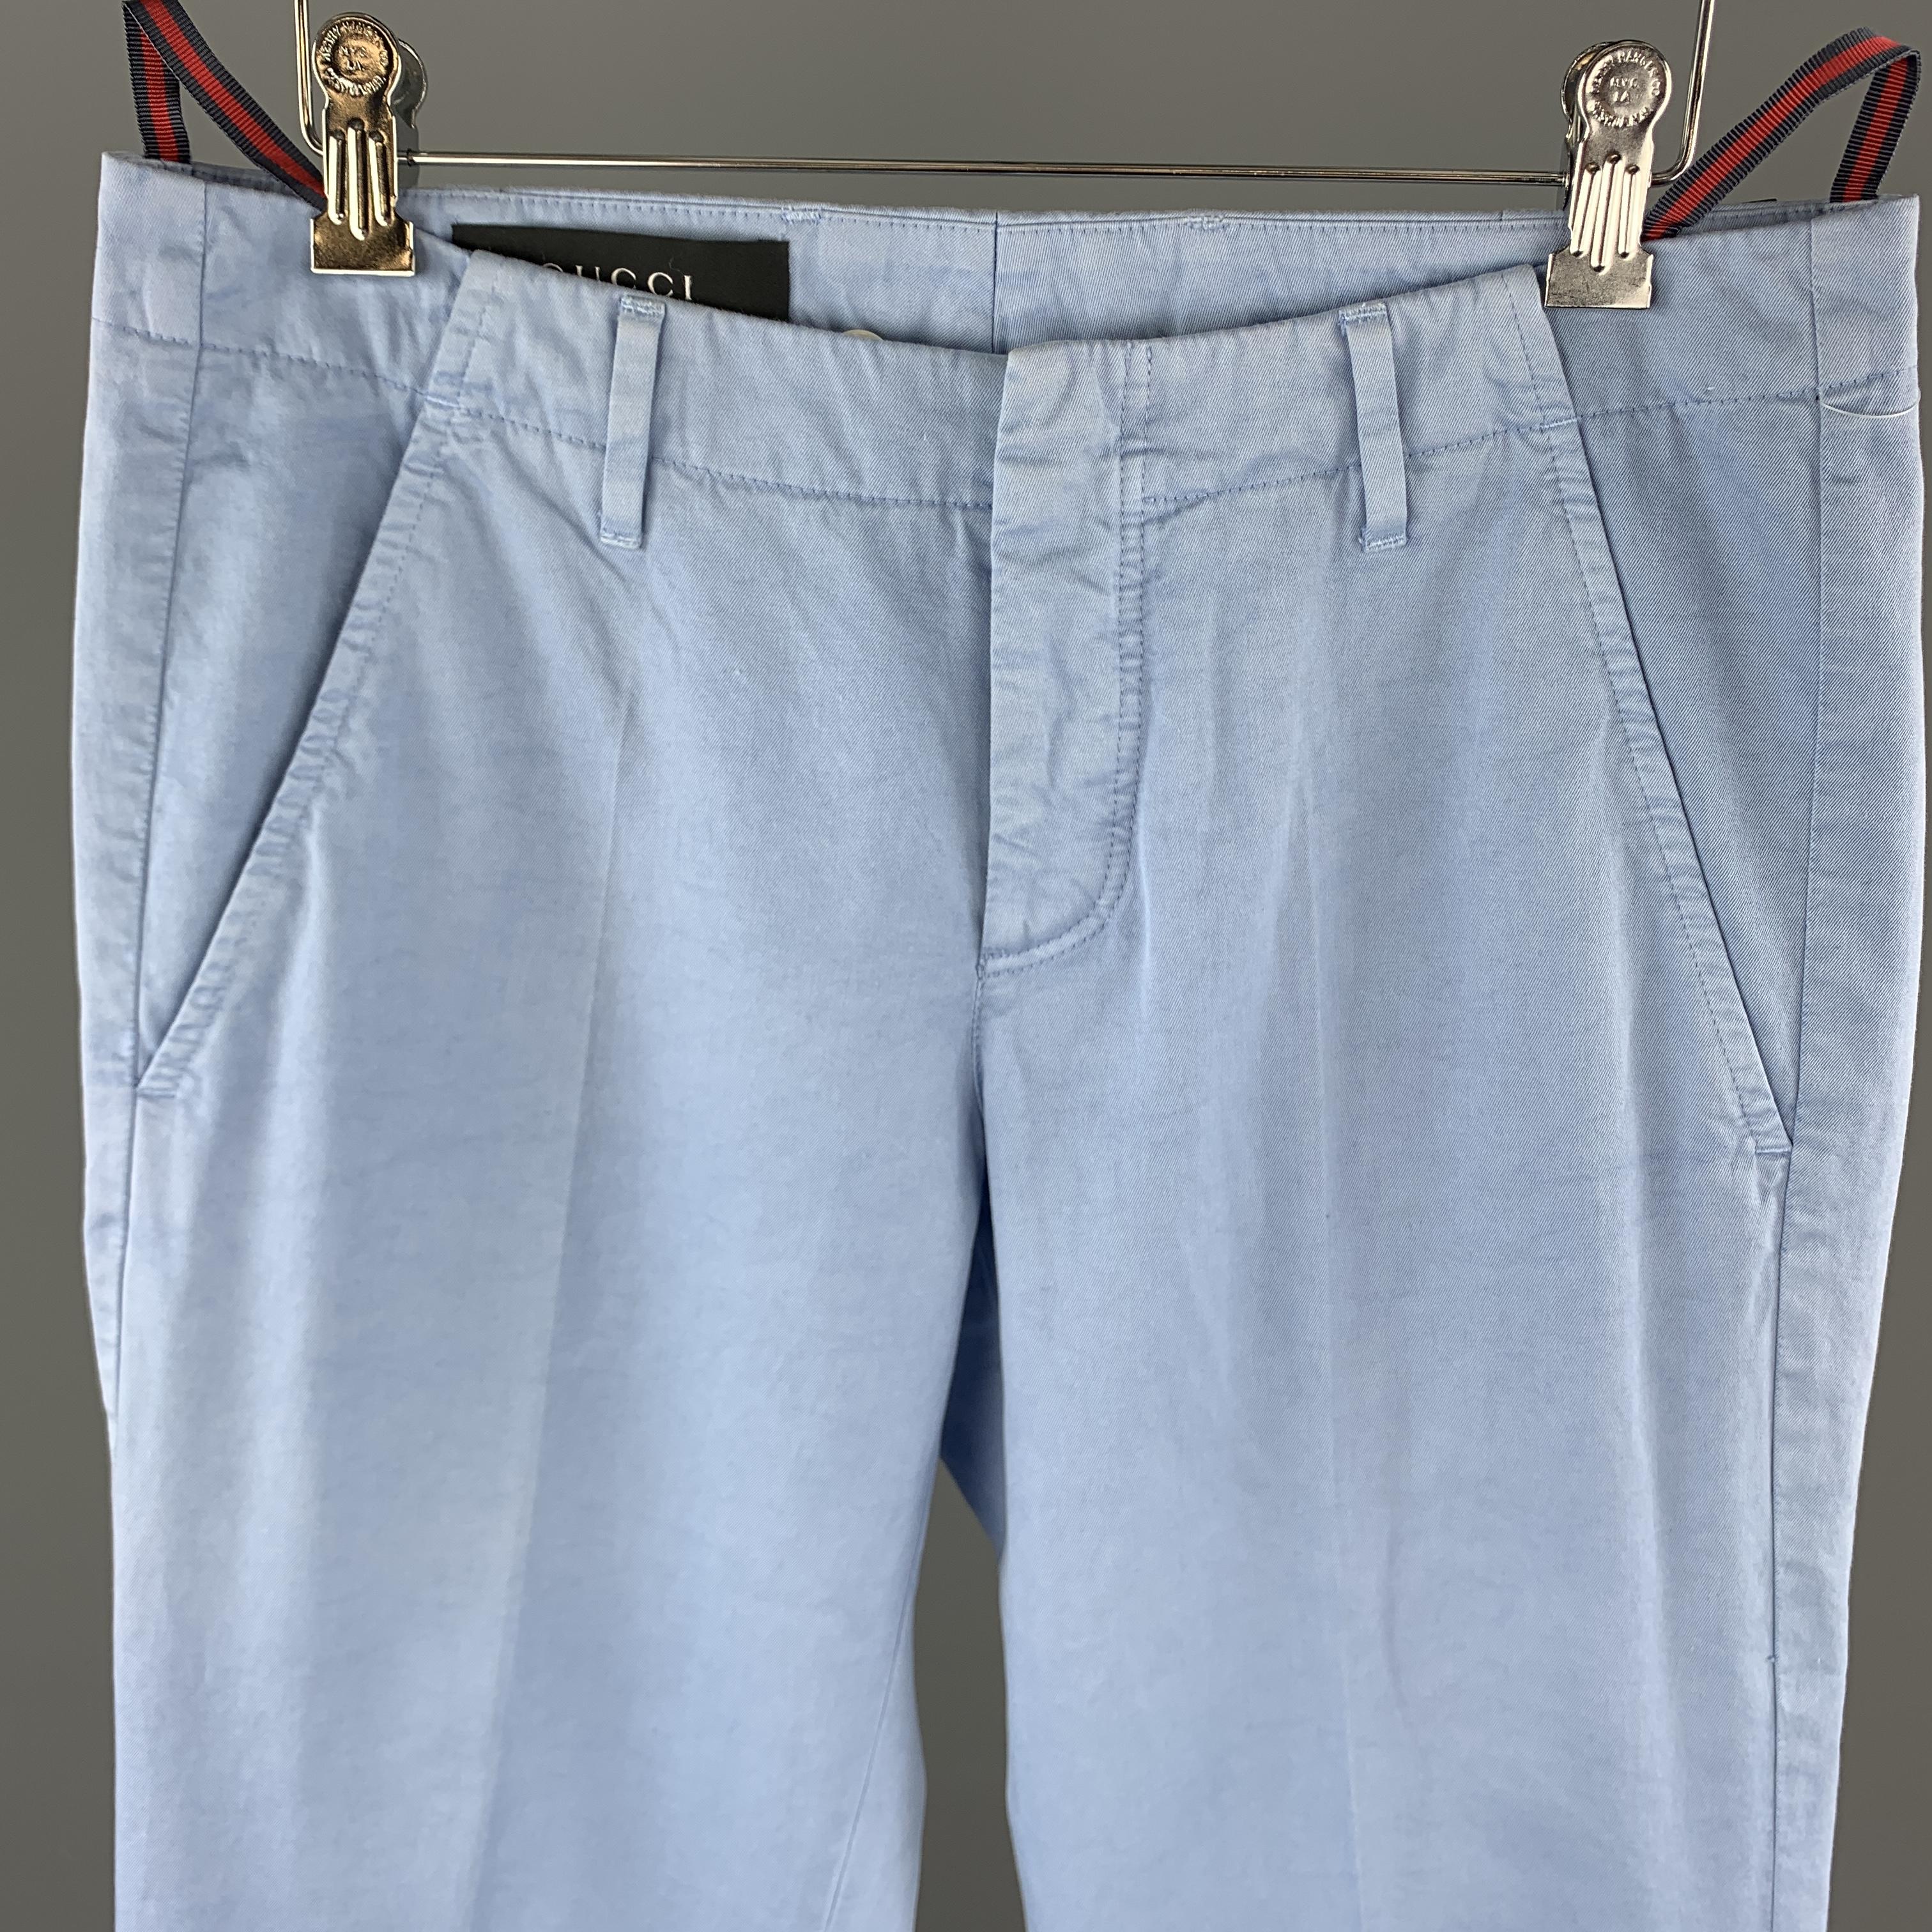 GUCCI chino pants come in light blue cotton twill with a low rise button fly front and inner waistband brace buttons. Made in Italy.

Good Pre-Owned Condition.
Marked: IT 44

Measurements:

Waist: 31.5 in.
Rise: 8.75 in.
Inseam: 30 in.